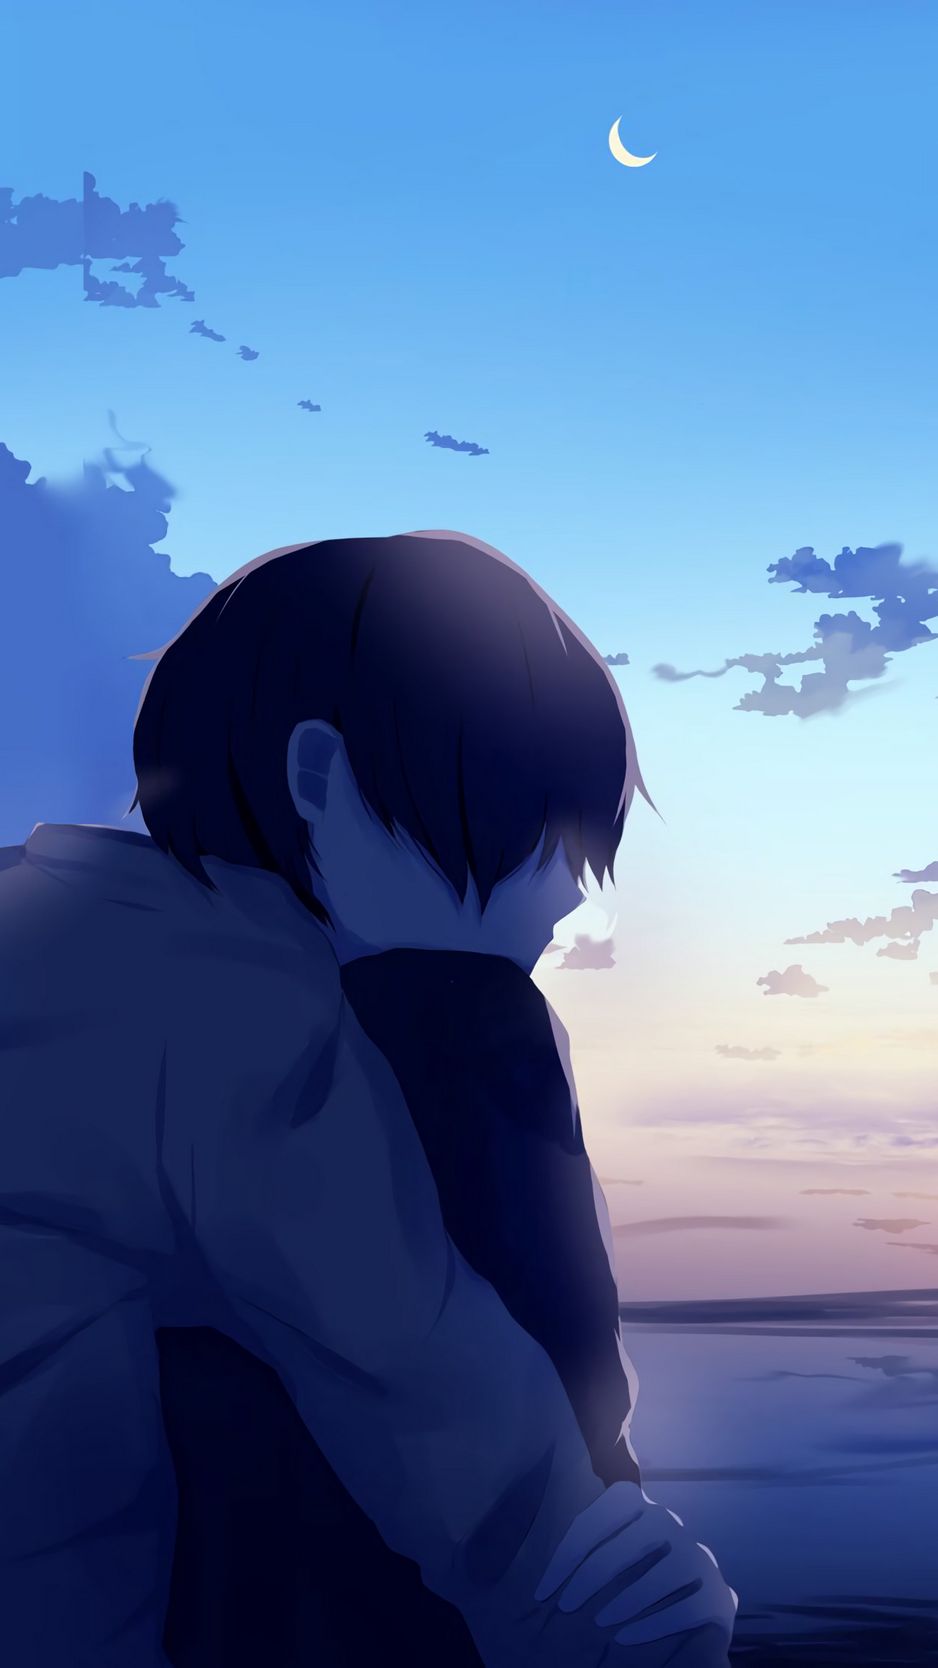 Download wallpaper 938x1668 boy, alone, sad, anime iphone 8/7/6s/6 for  parallax hd background